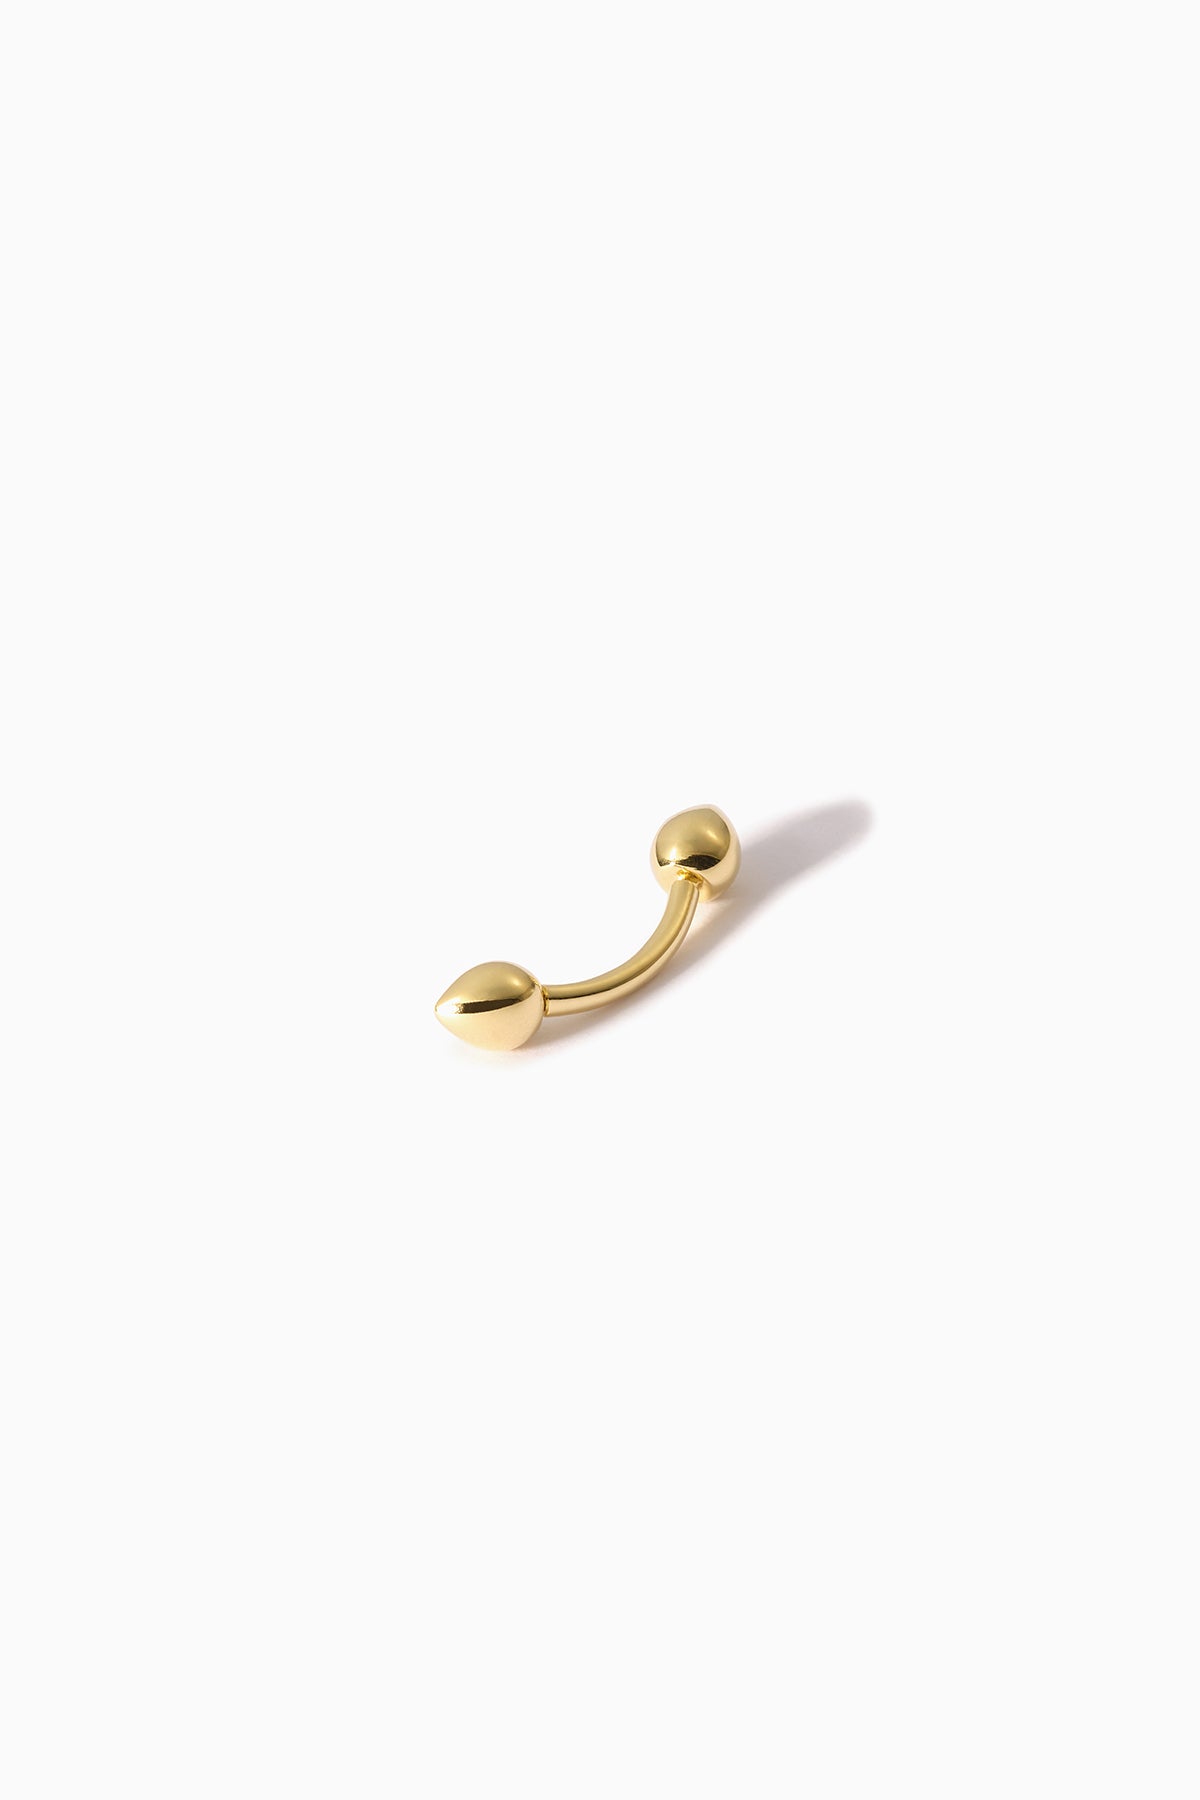 HANNAH MARTIN | 18K YELLOW GOLD TEARDROP CURVED BARBELL S EARRING